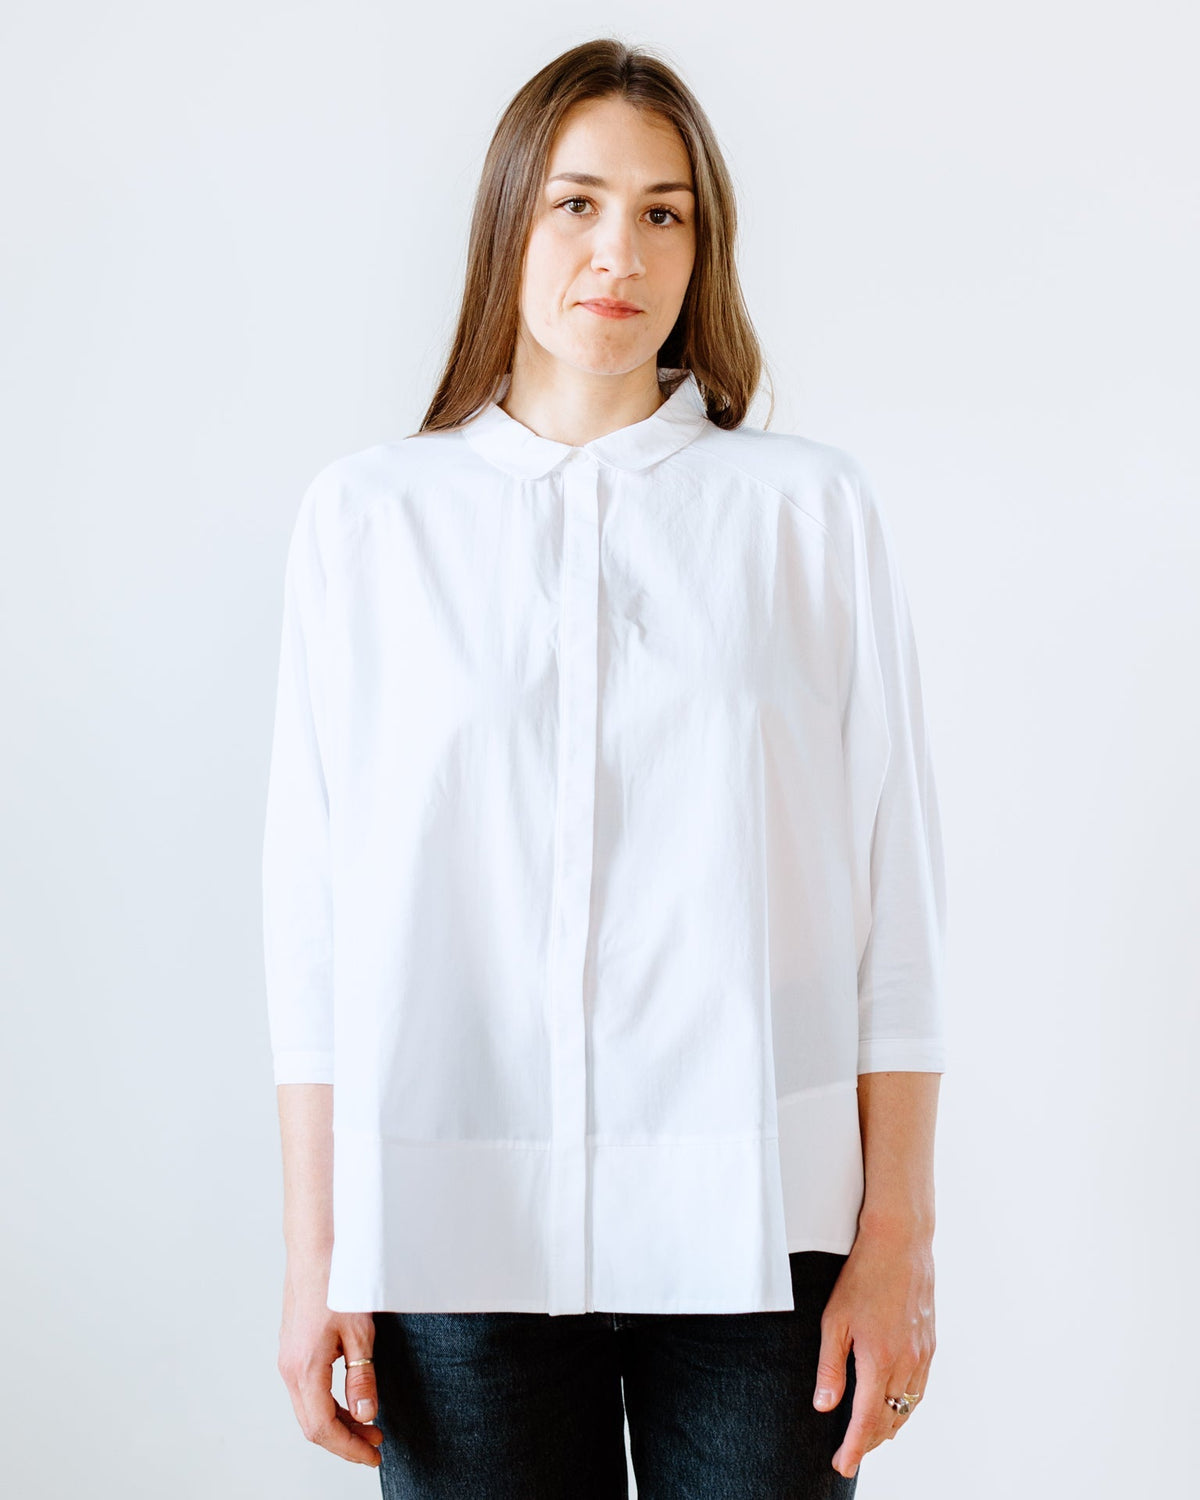 Beaumont Organic Clothing Everly Organic Cotton Shirt in White